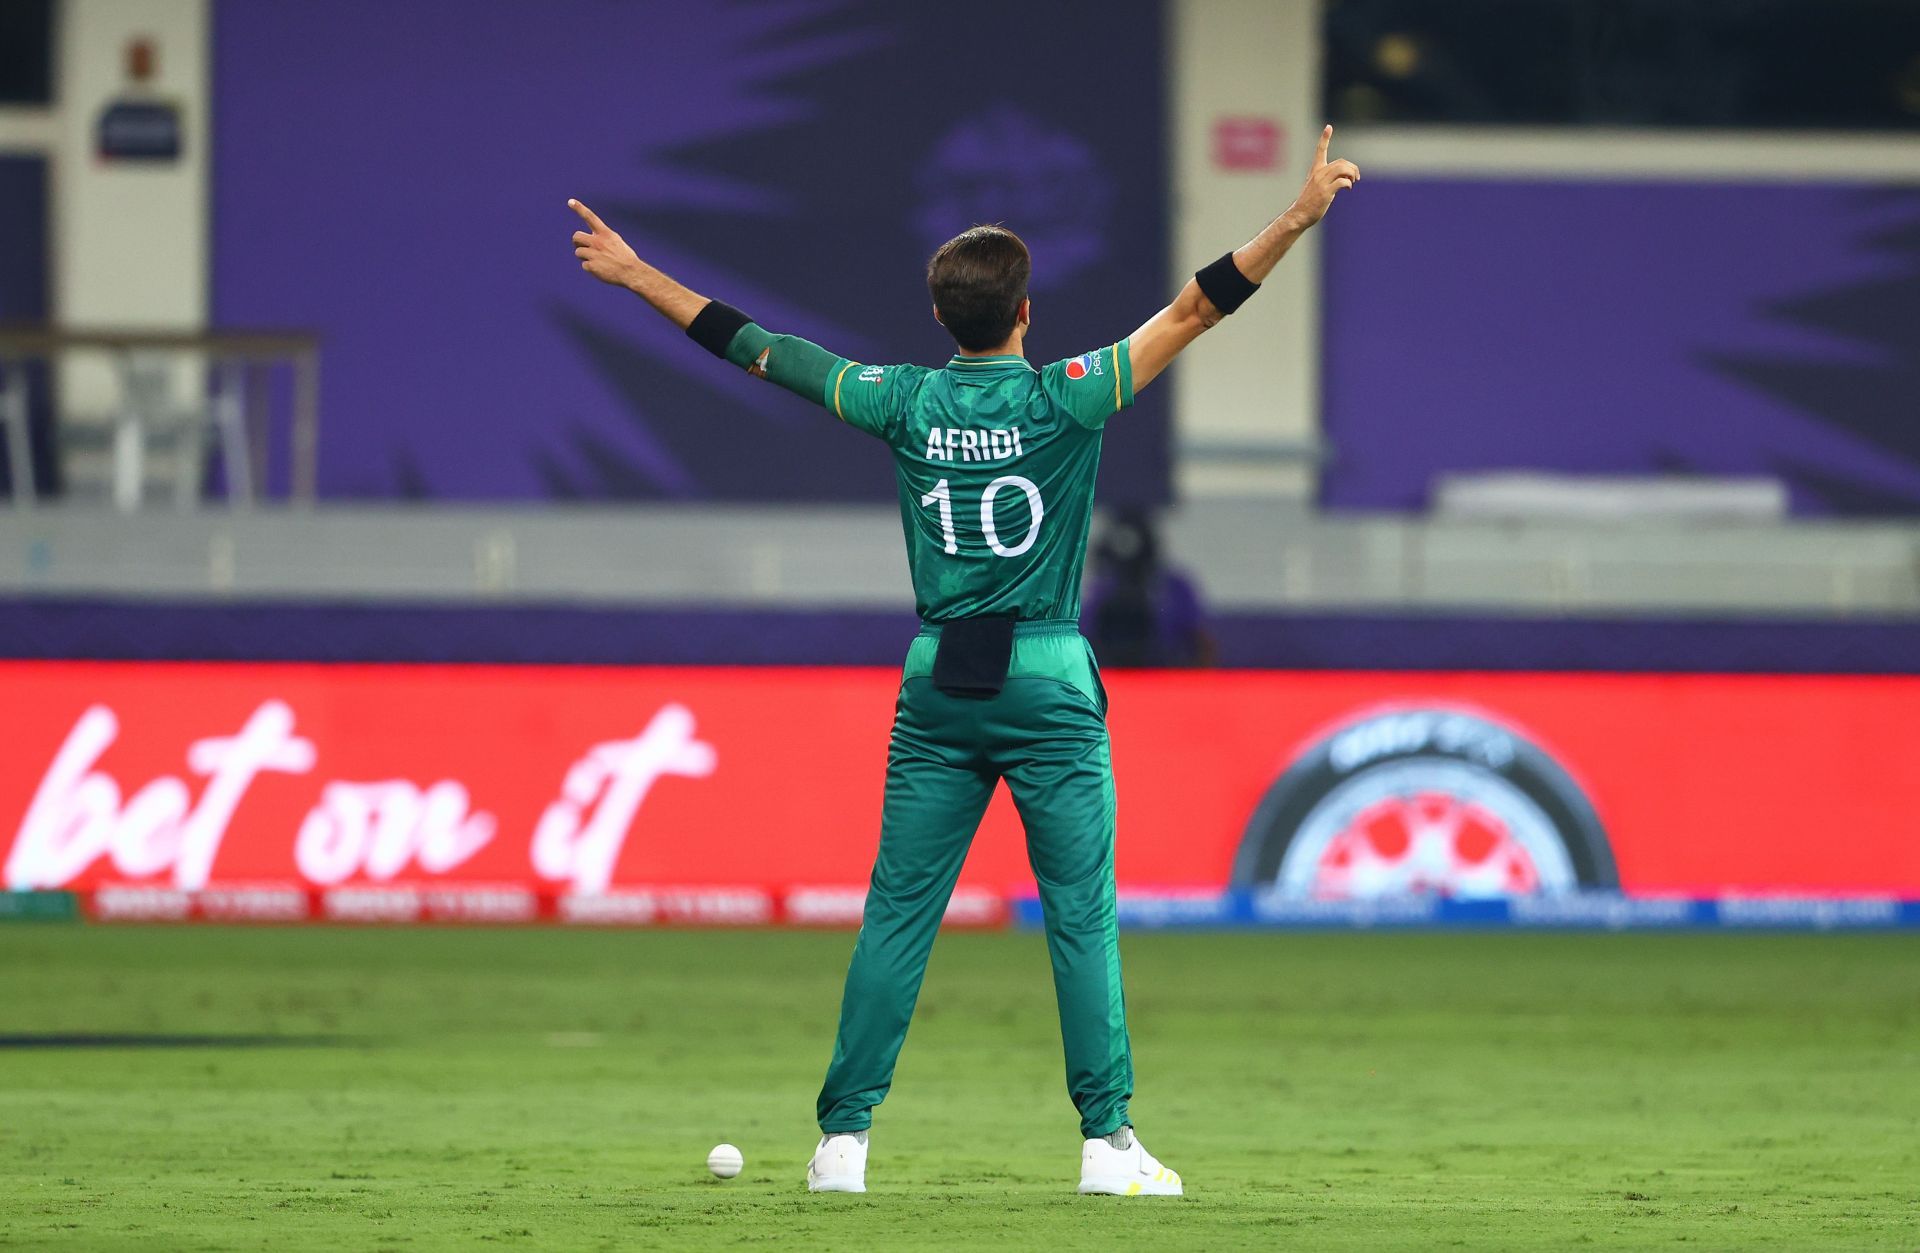 Shaheen Shah Afridi has been irresistible at the T20 World Cup